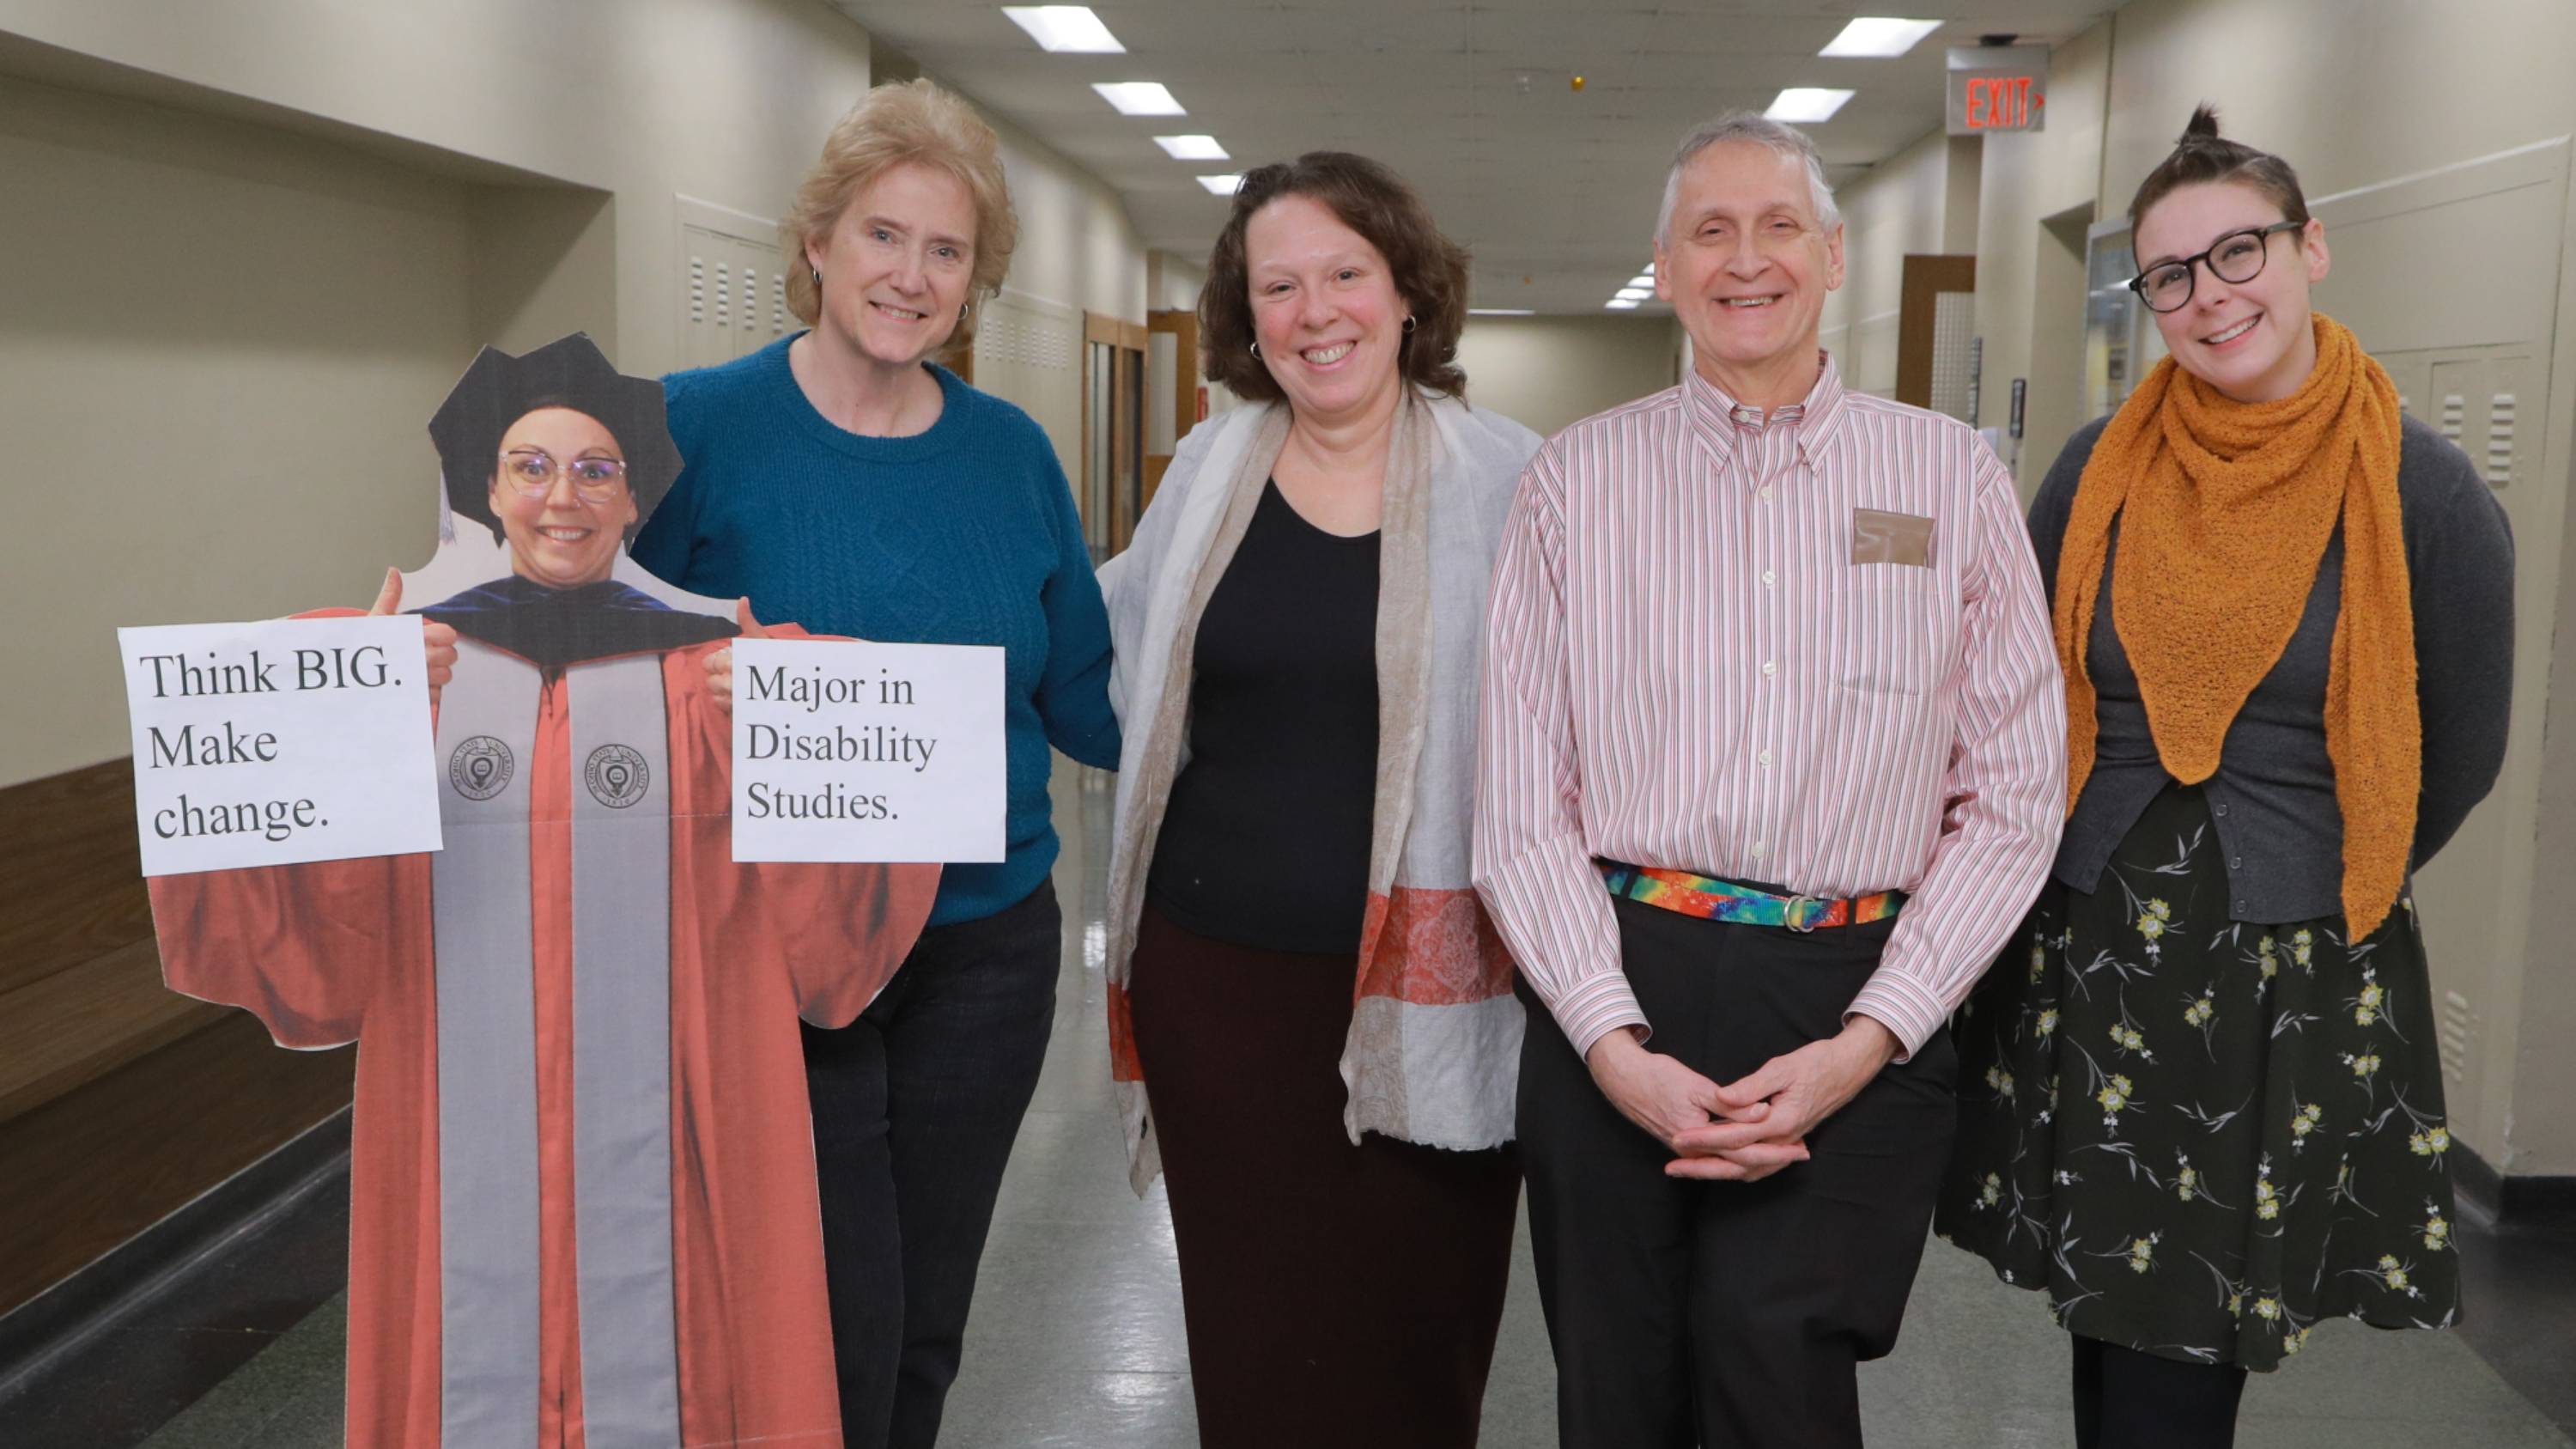 Disability Studies office administrator Linda Curtis standing with professors Kim Nielsen, Jim Ferris, and Becca Monteleone, smiling in a hallway. They are next to a cardboard cutout of professor Ally Day with signs that say "Think Big, Make Change. Major in Disability Studies